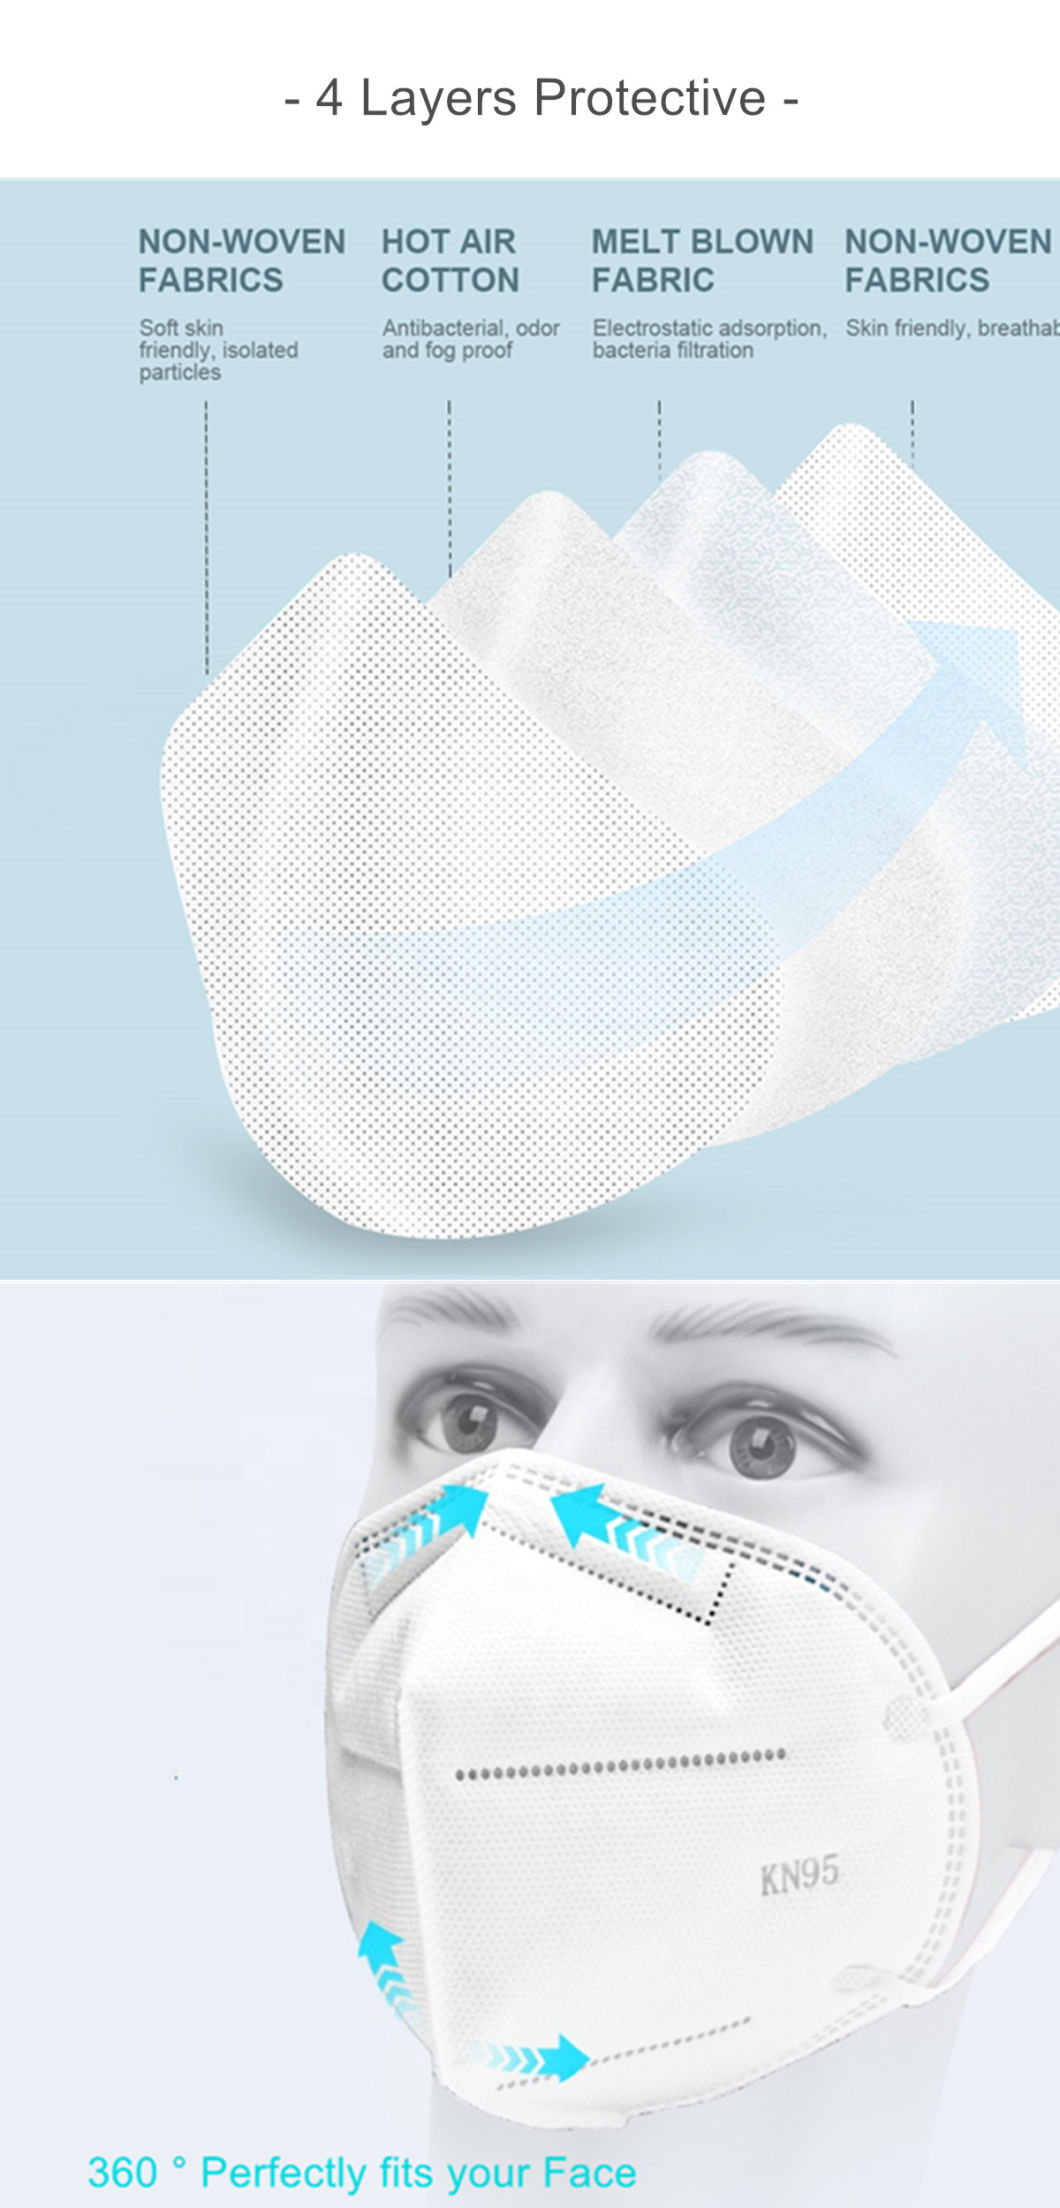 Factory Direct Ce Niosh Approved Fish Mouth Type Face Mask FFP3 Disposable Dust Mask